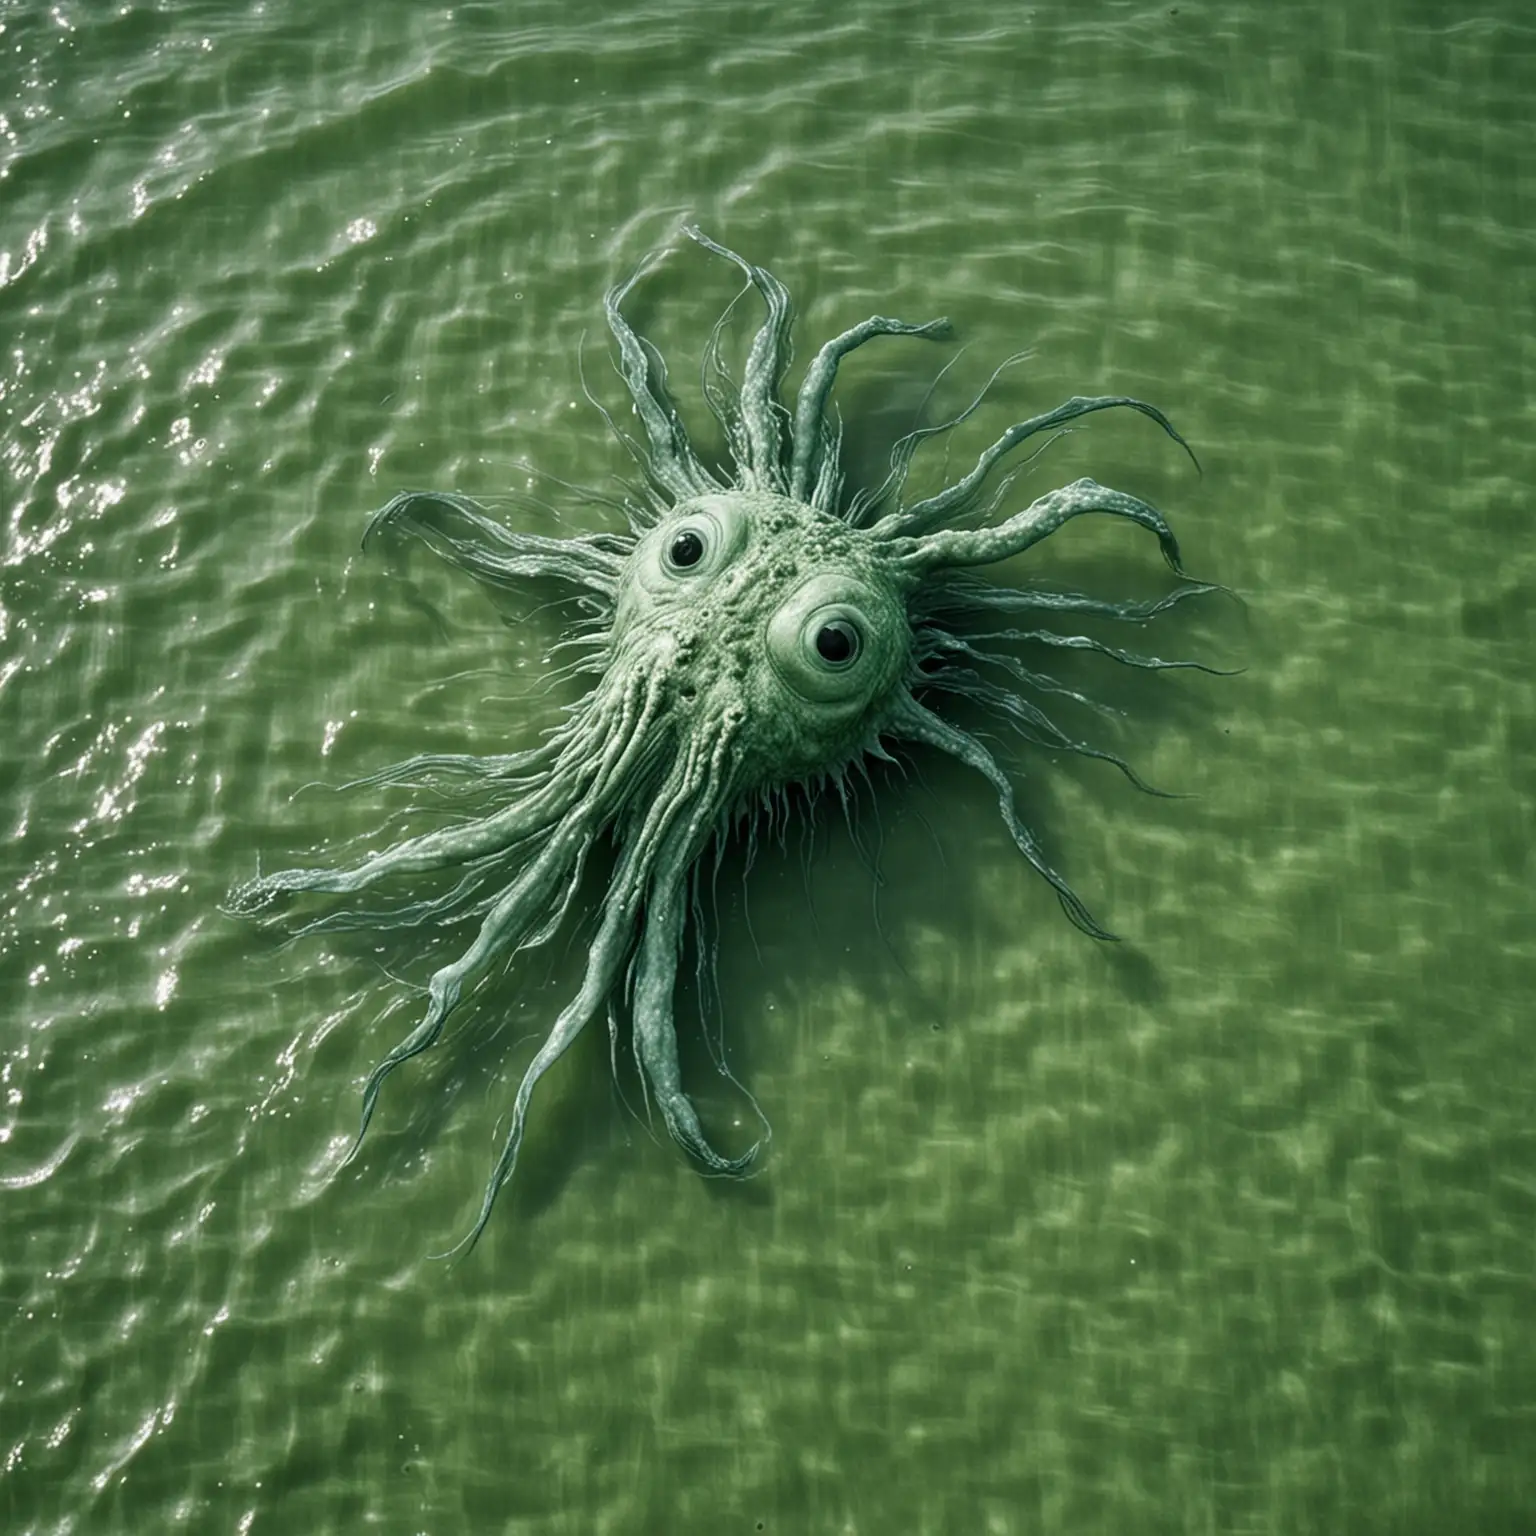 Mysterious Green Sea Creature Swimming in Enigmatic Waters